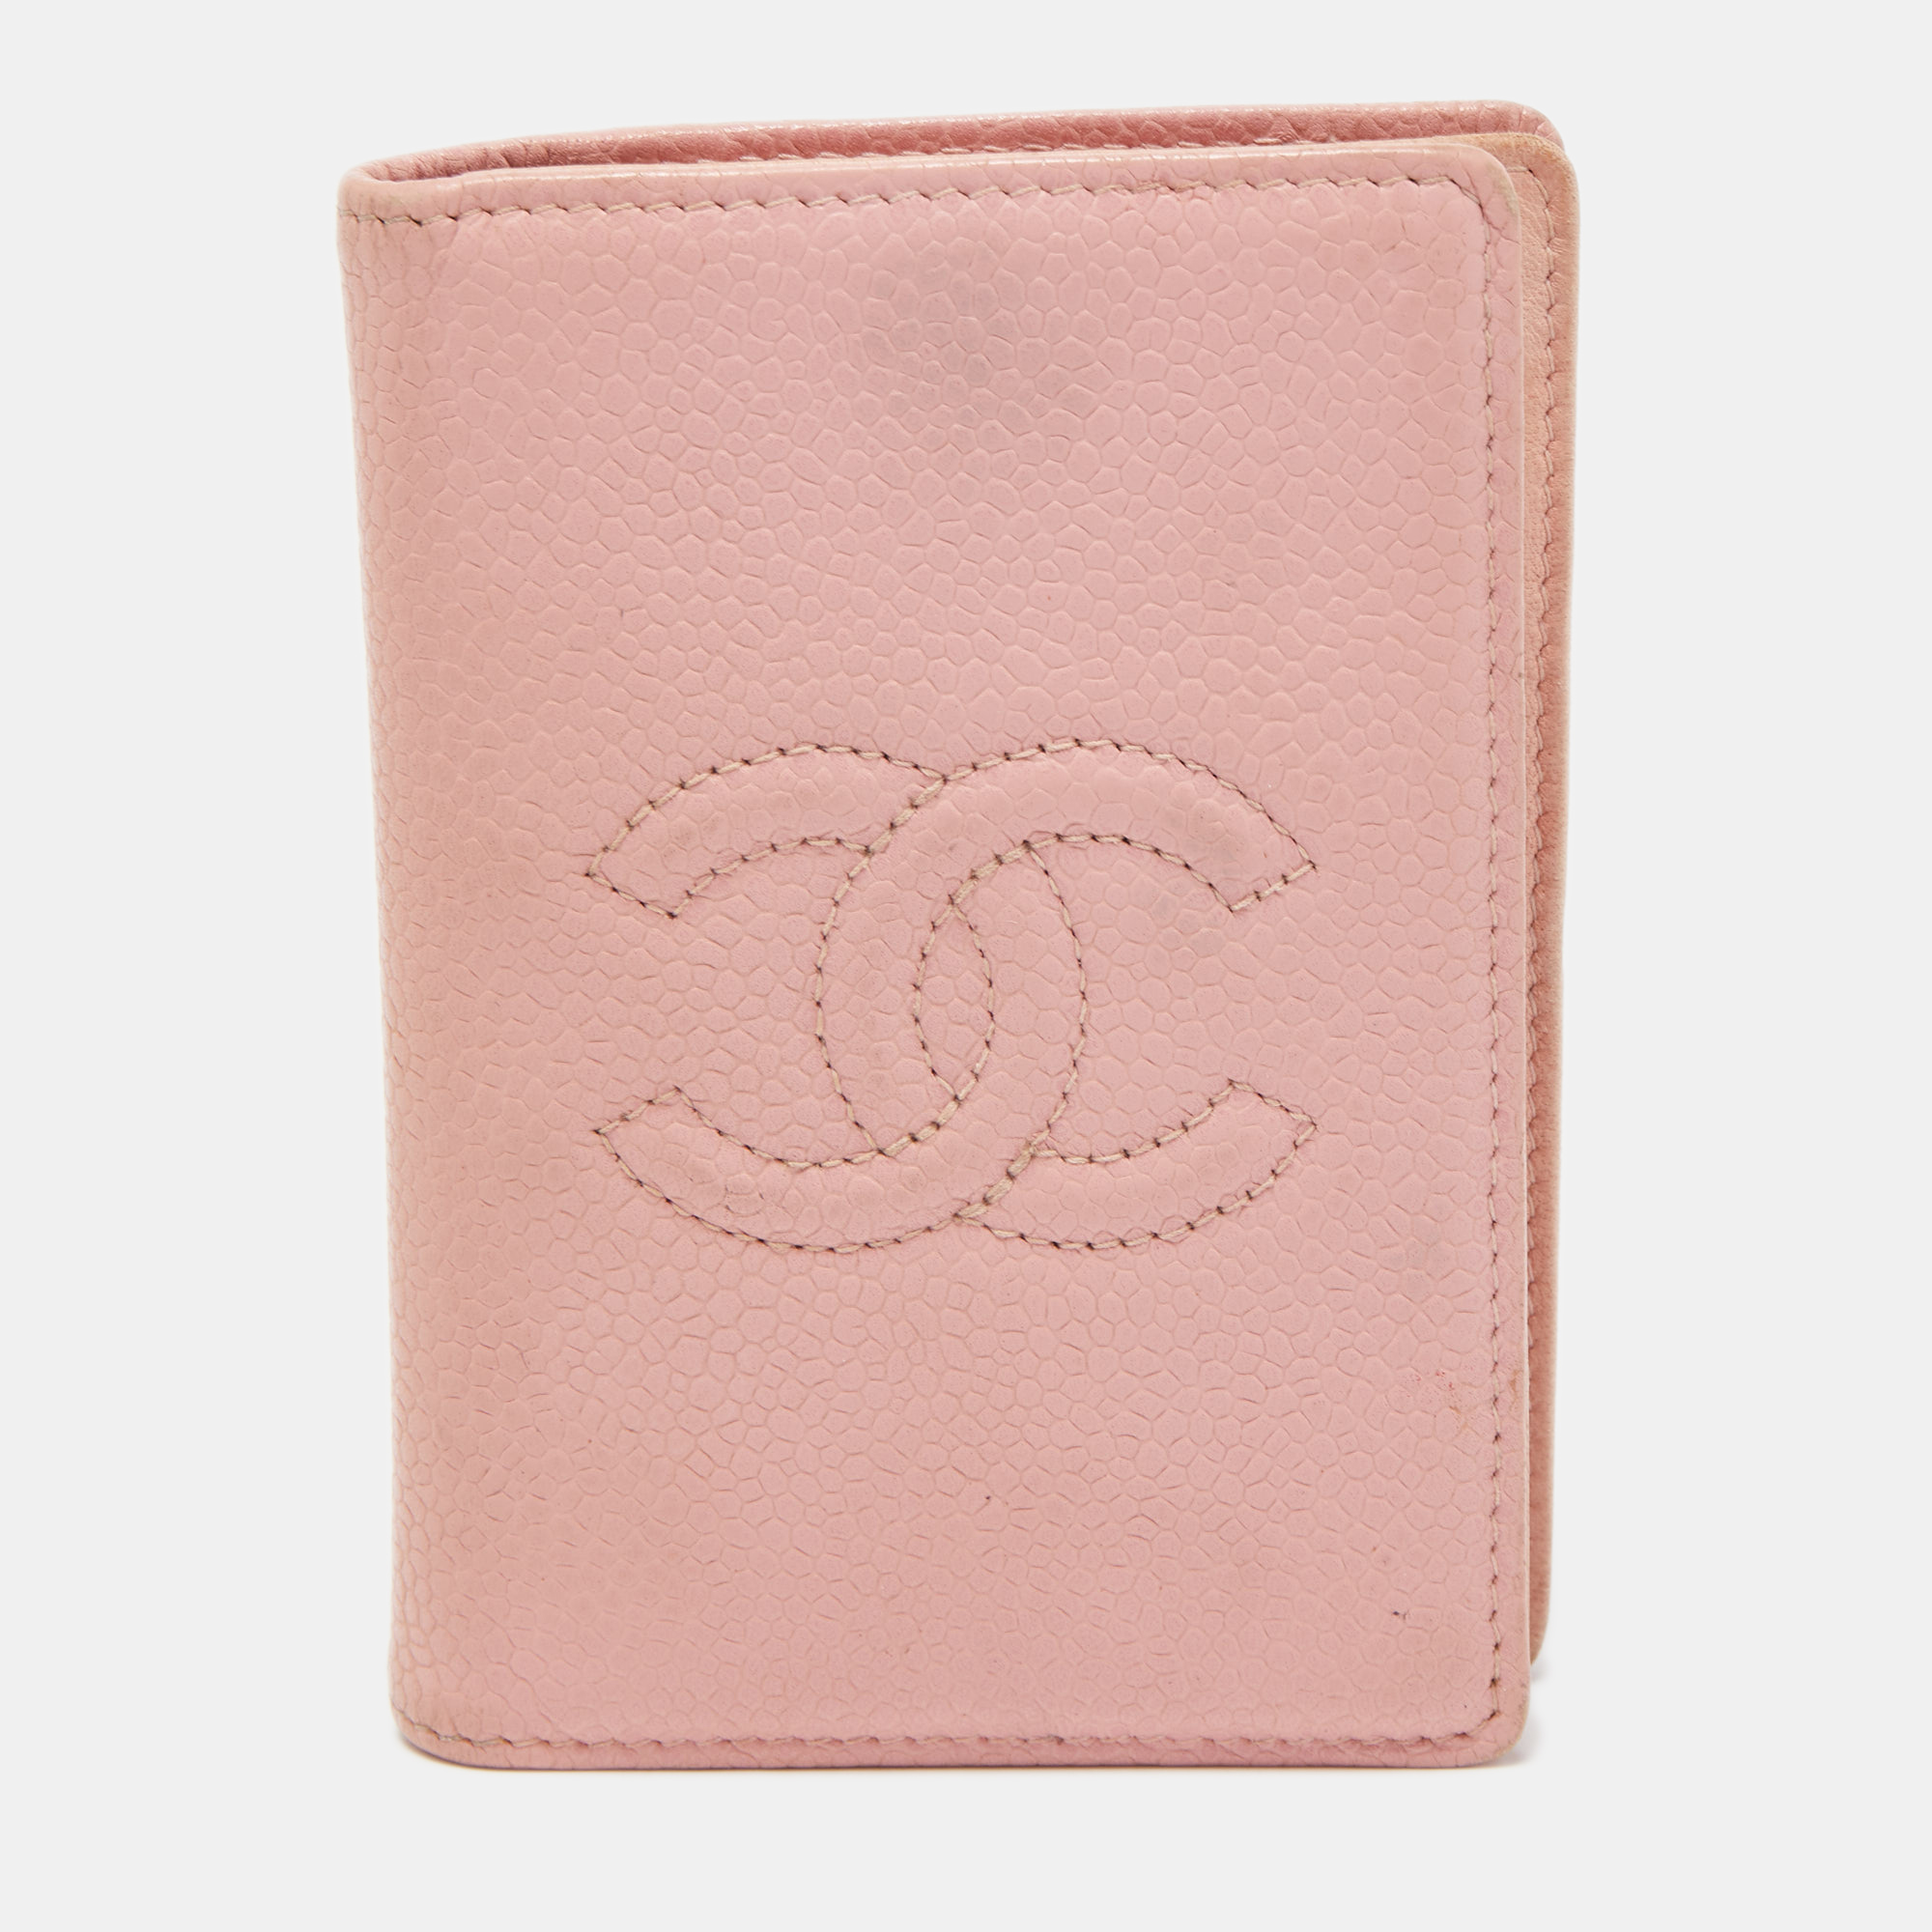 Pre-owned Chanel Light Pink Caviar Leather Cc Bifold Card Case